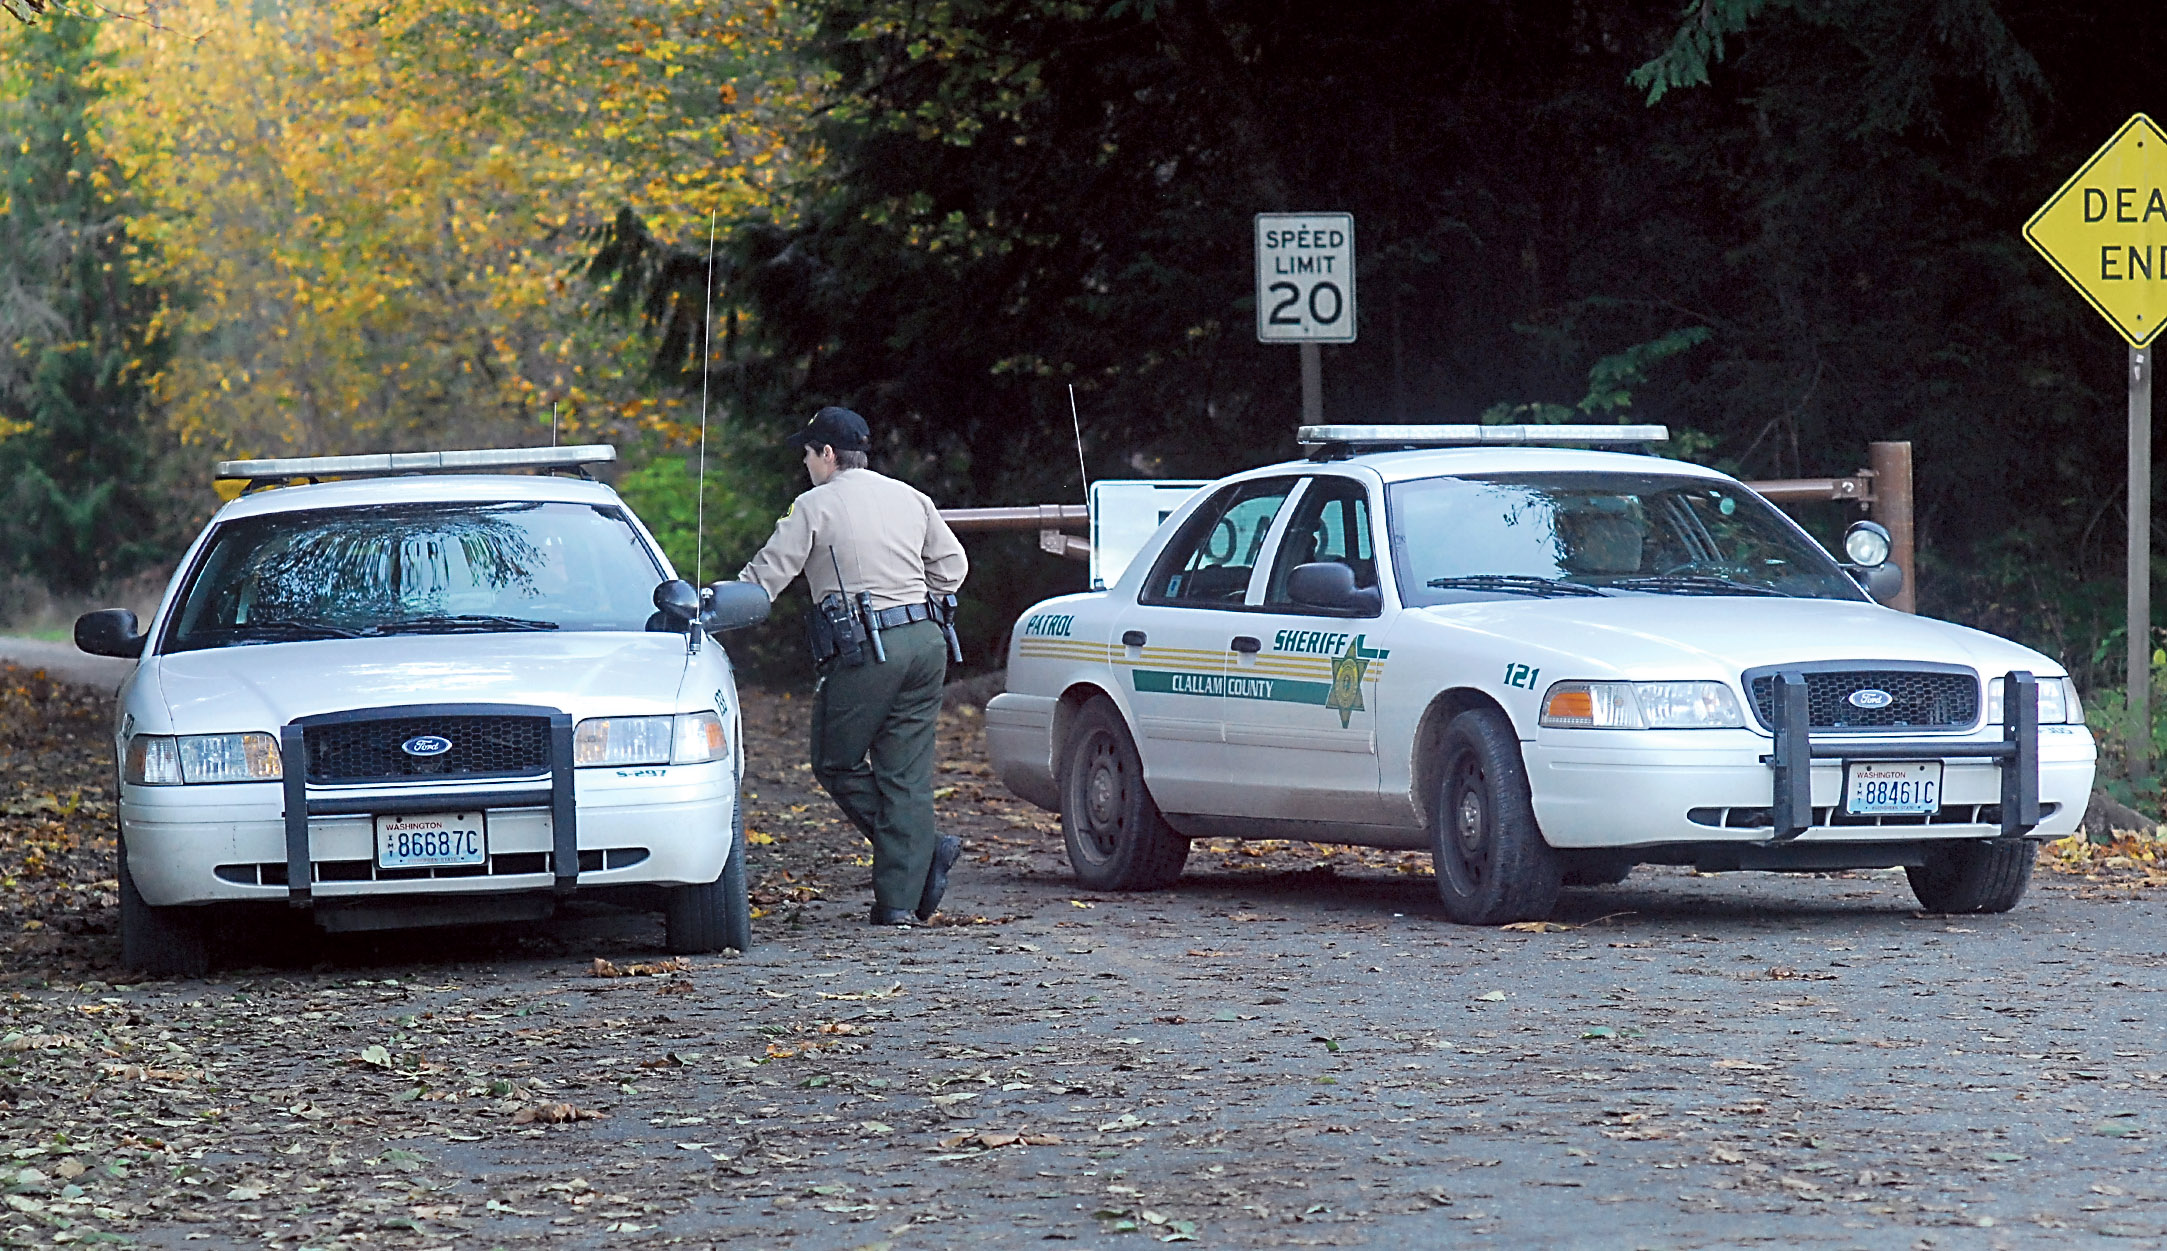 Clallam County Sheriff's Deputy Amy Bundy confers with another deputy while guarding the access to Lower Dam Road west of Port Angeles on Thursday after a body was found in the woods near the site of the former Elwha Dam. Keith Thorpe/Peninsula Daily News